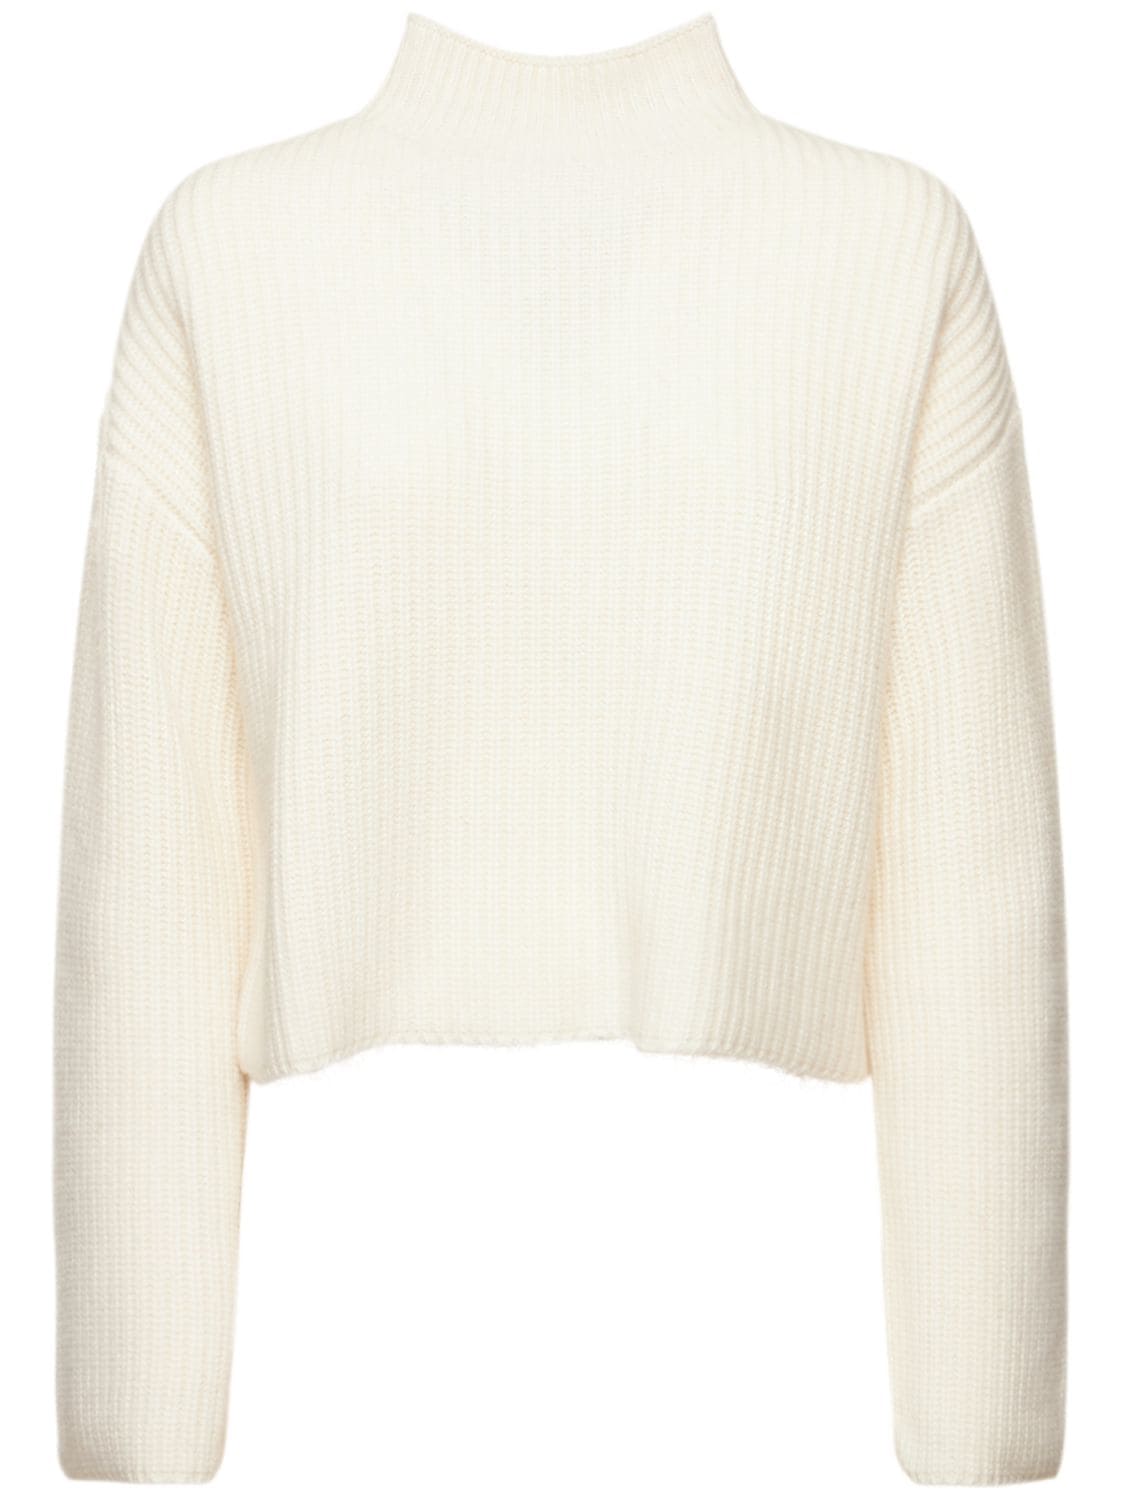 Image of Faro High Neck Cashmere Sweater